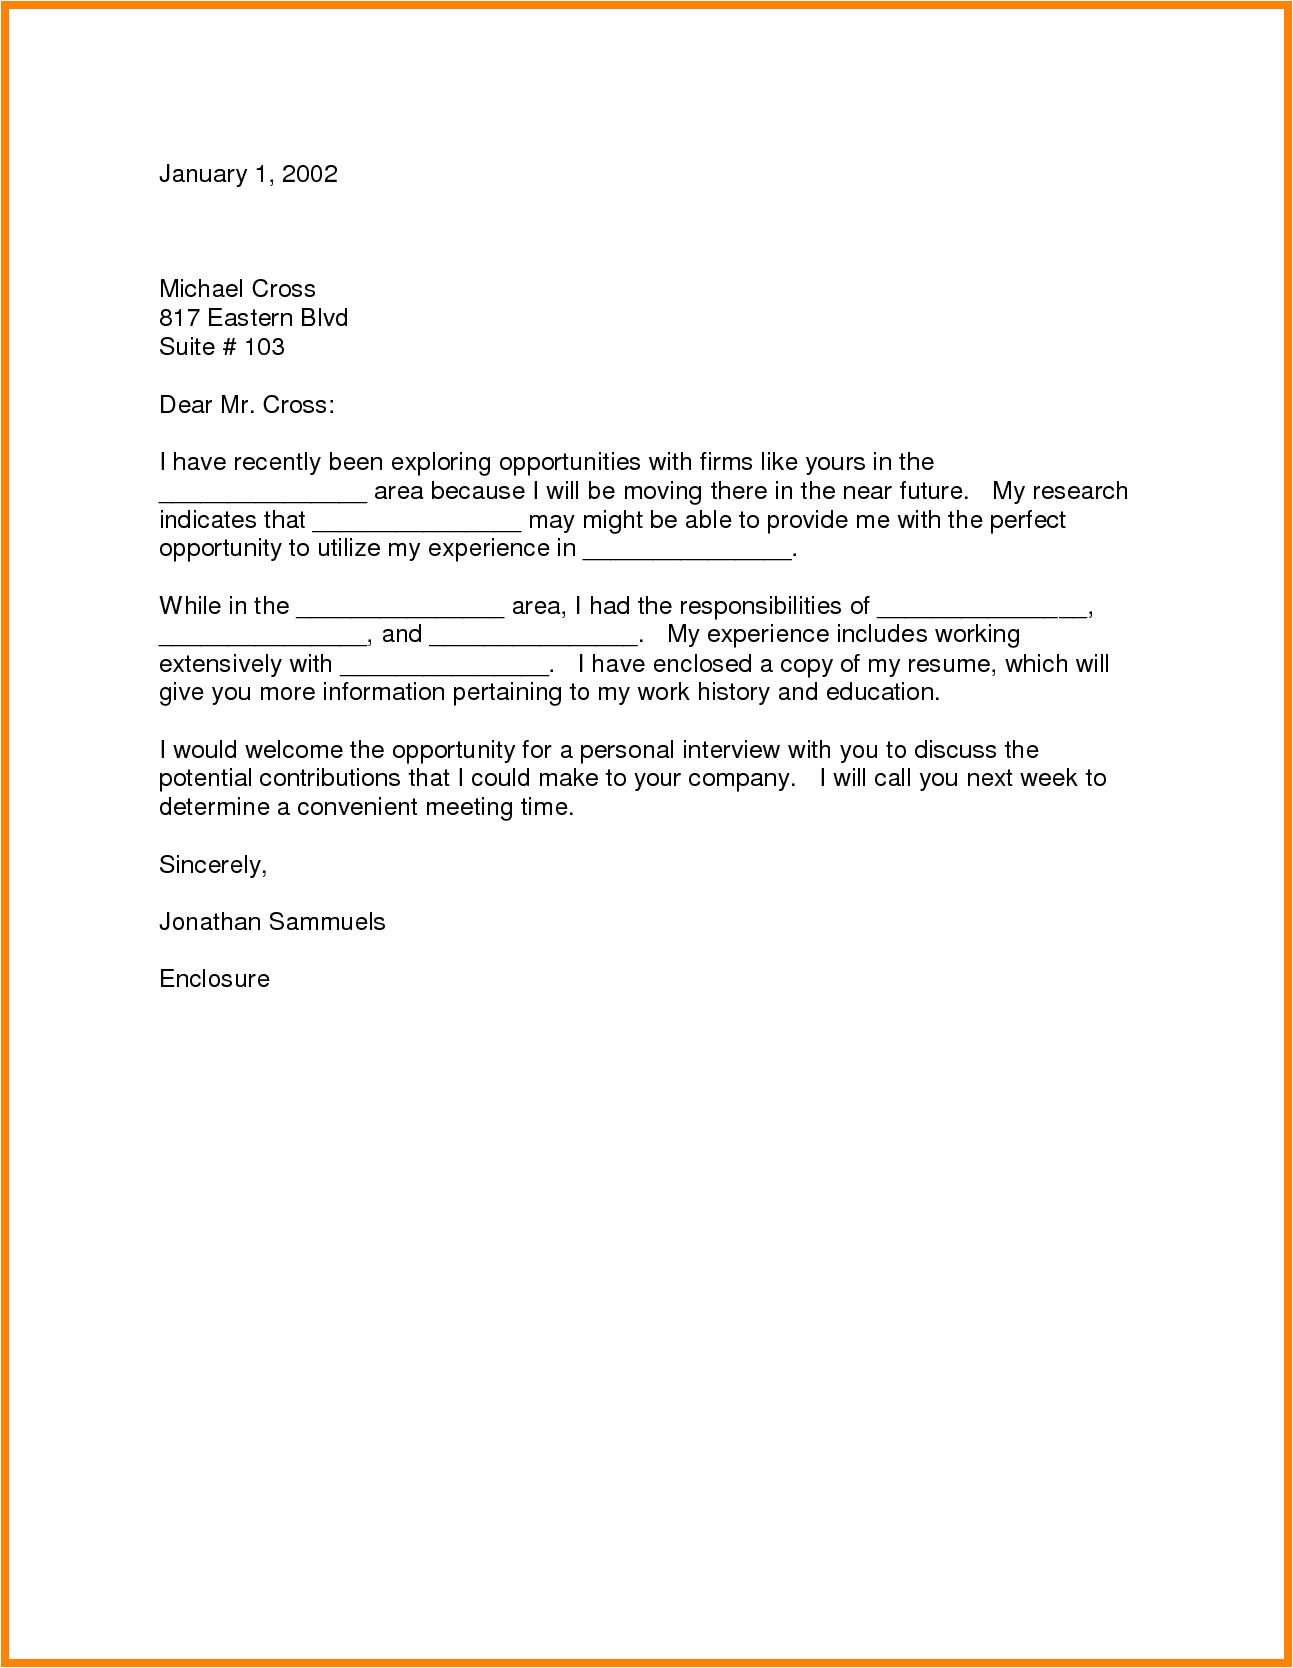 5 relocation cover letter